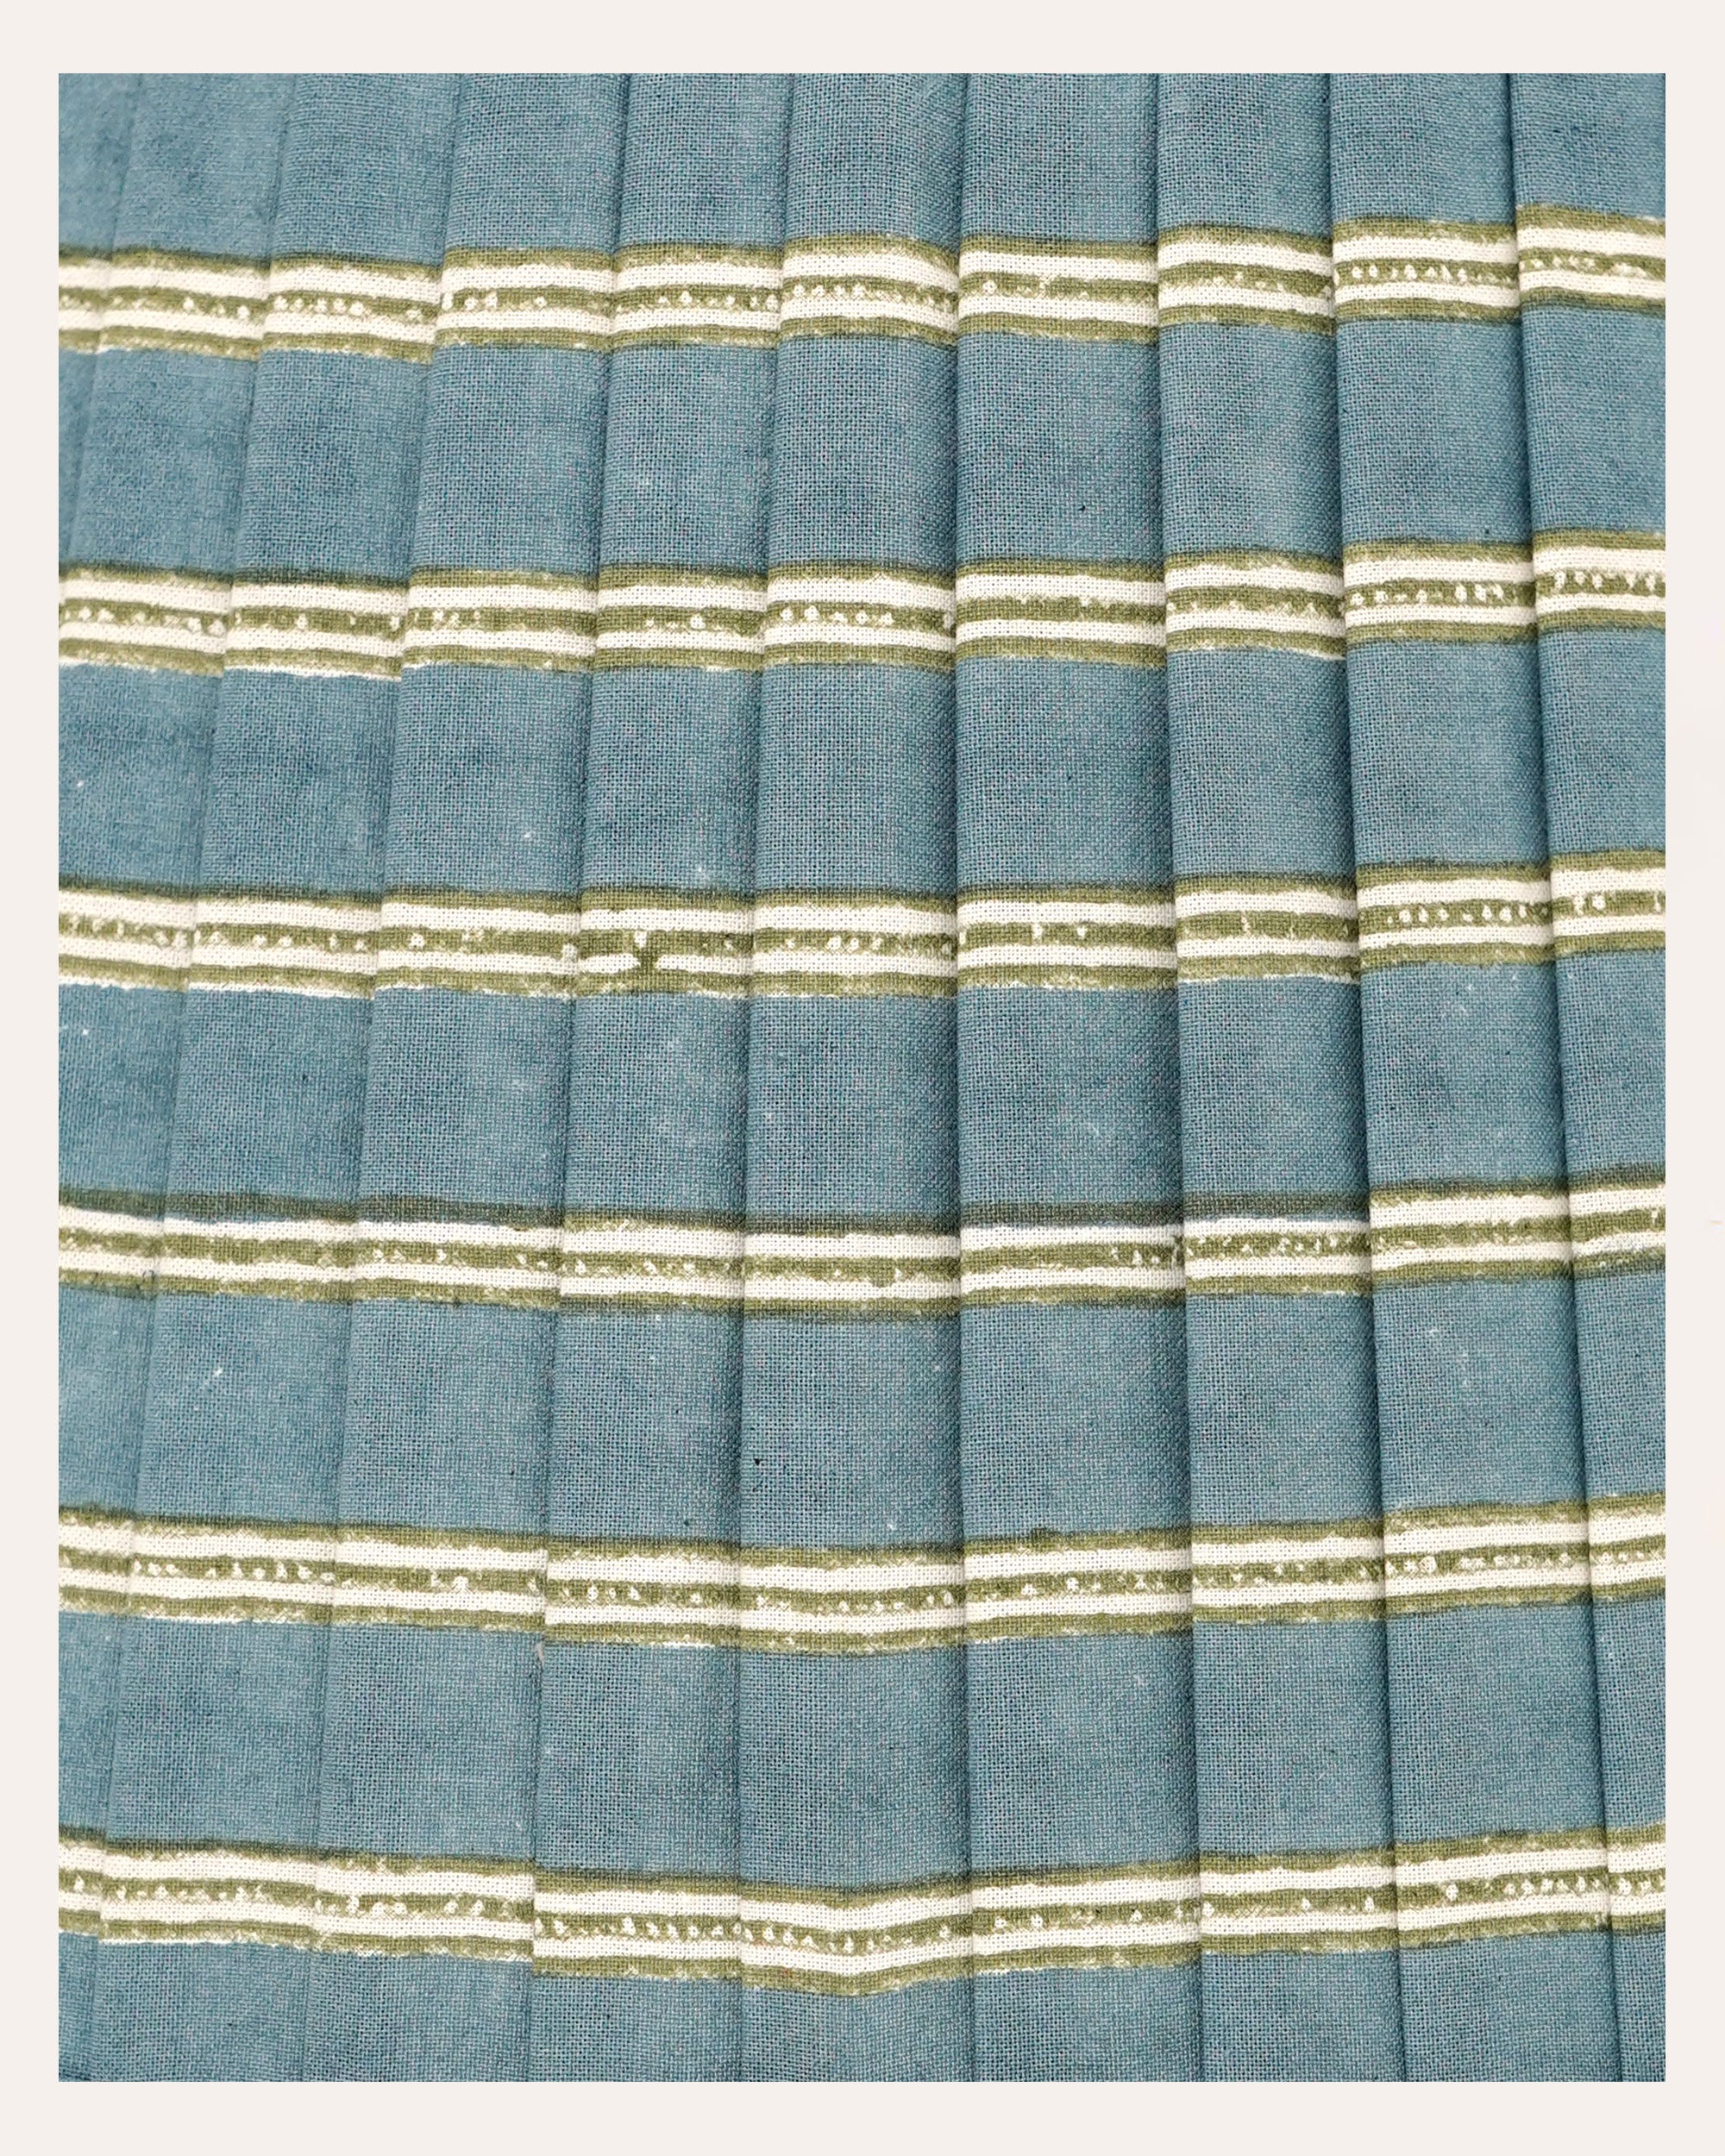 Edo Stripe Pleated Lampshade - Blue and Sage Green